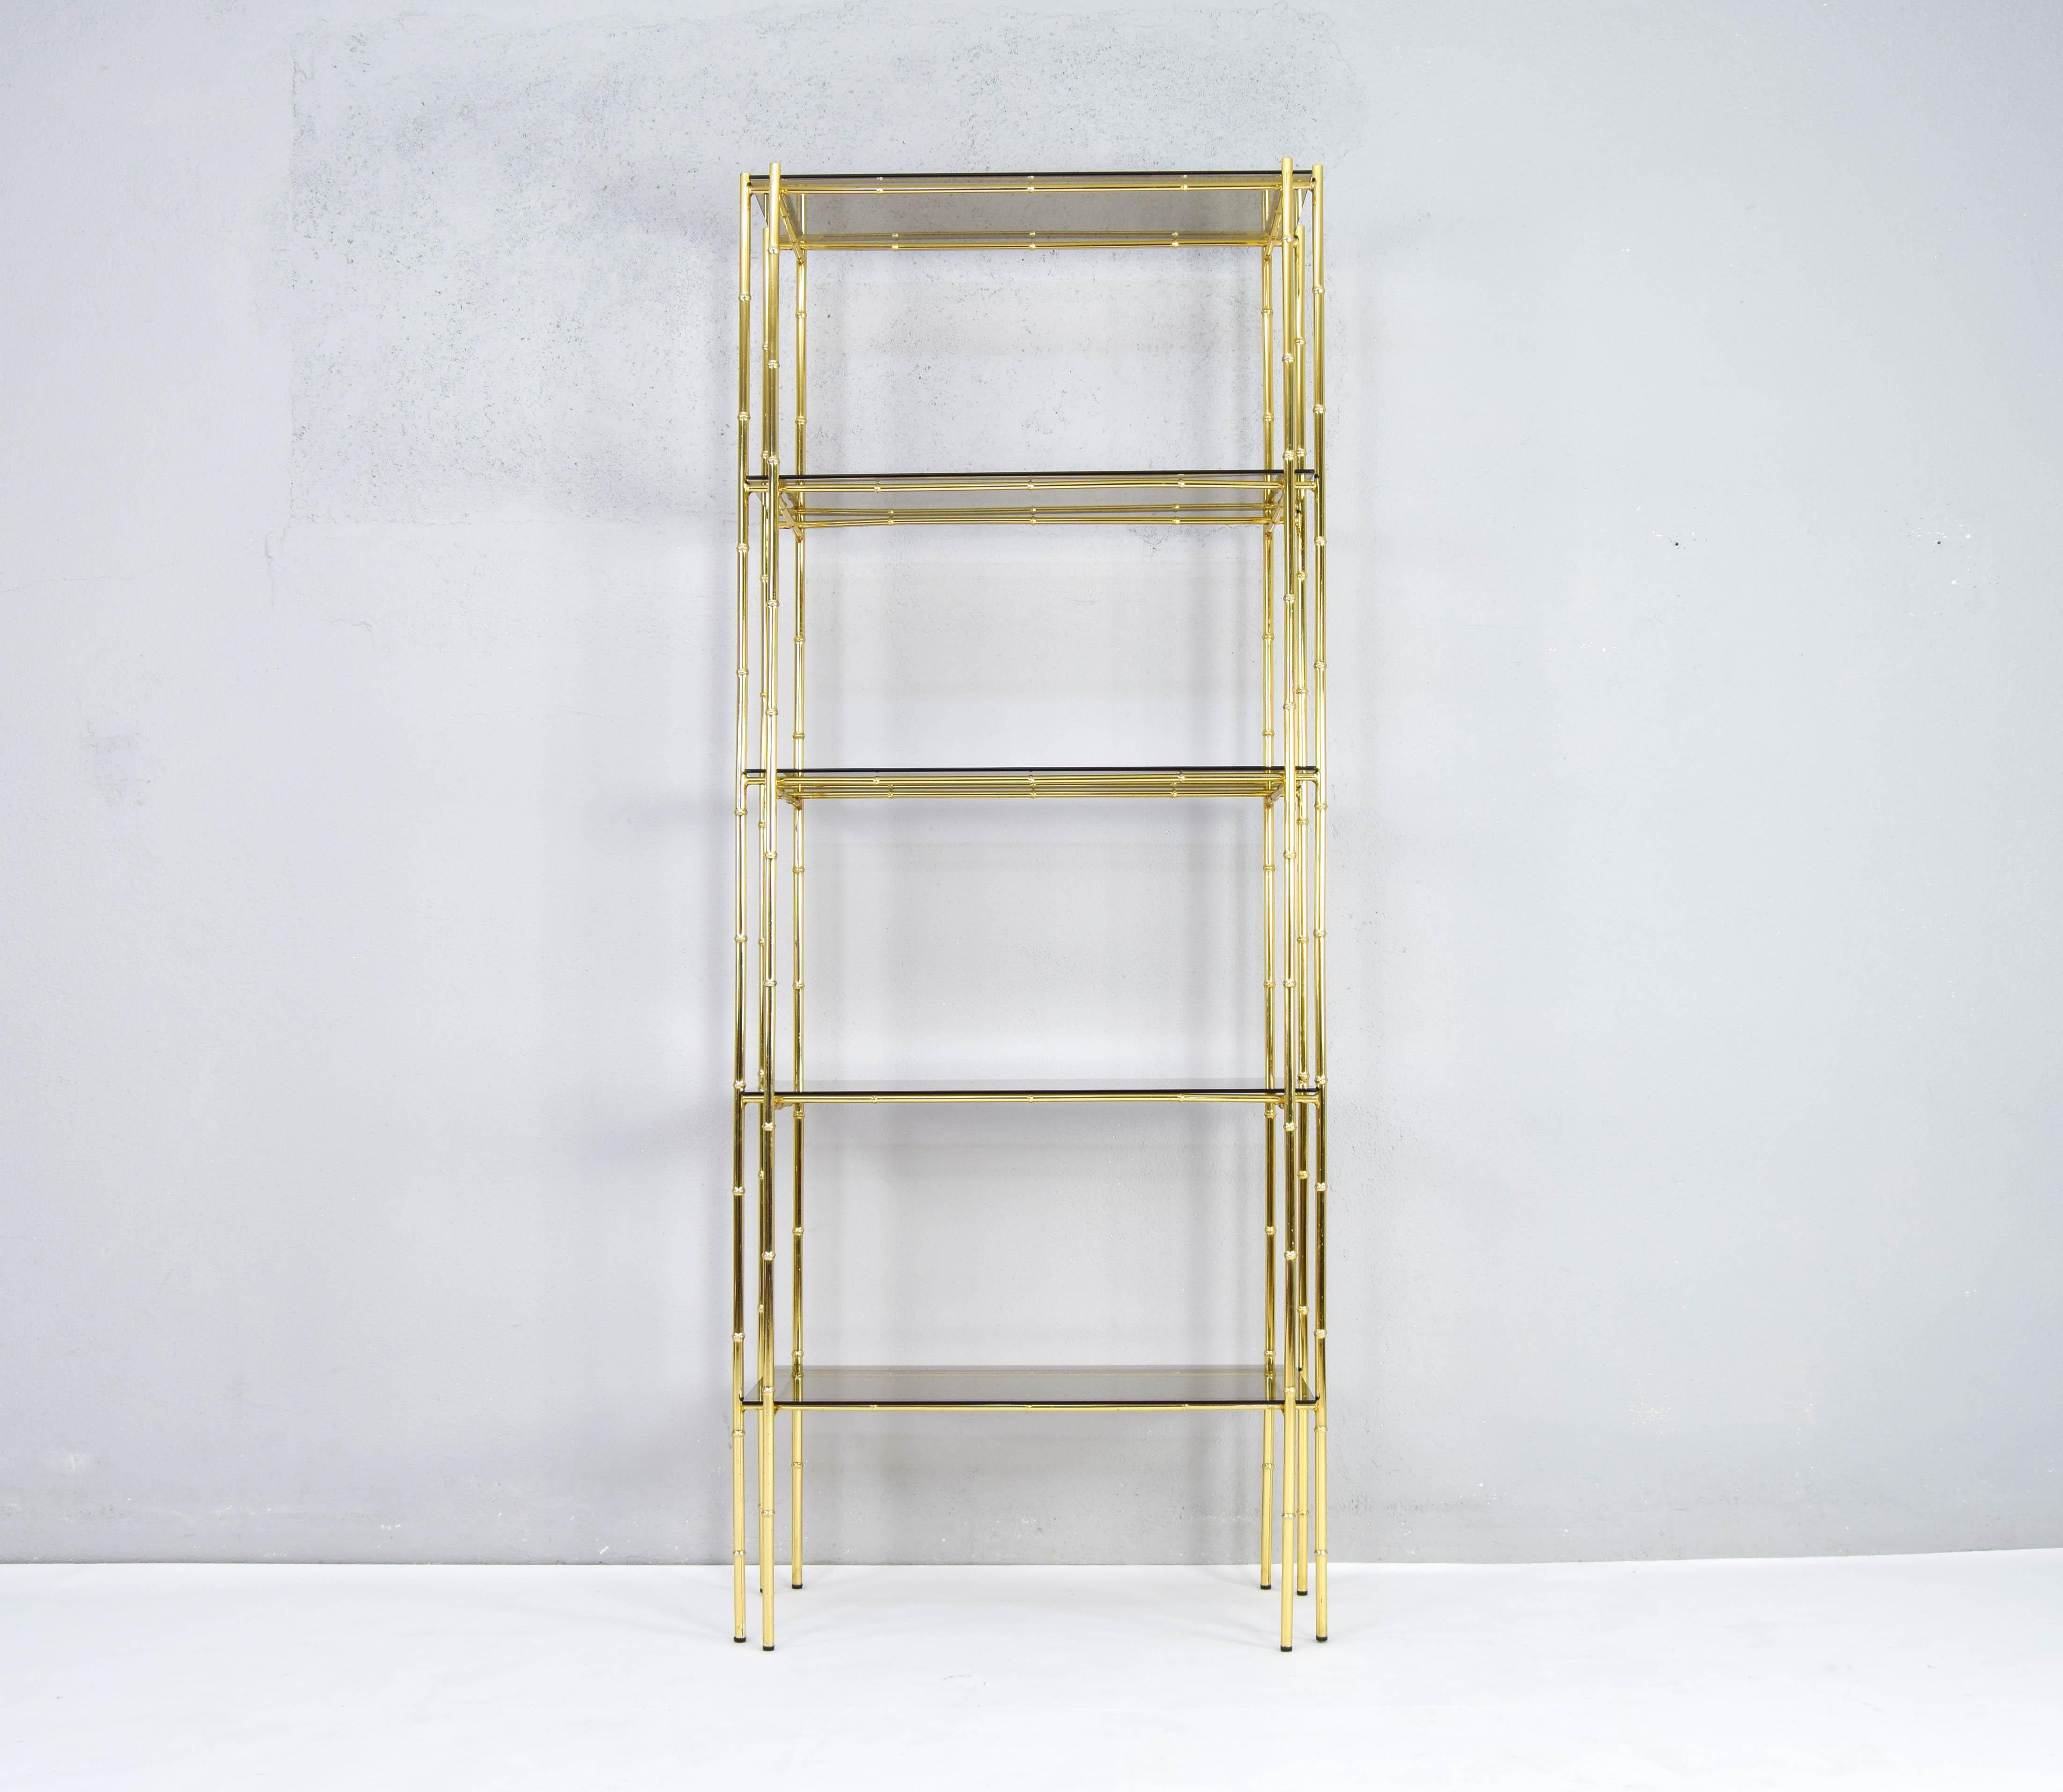 Great five-shelf bookcases manufactured by the now defunct Spanish company Bosquesot, Manises, Valencia in the 70s.
Golden steel structure in the form of delicate bamboo rods and smoked glass shelves.
Hollywood Regency in style, this piece is